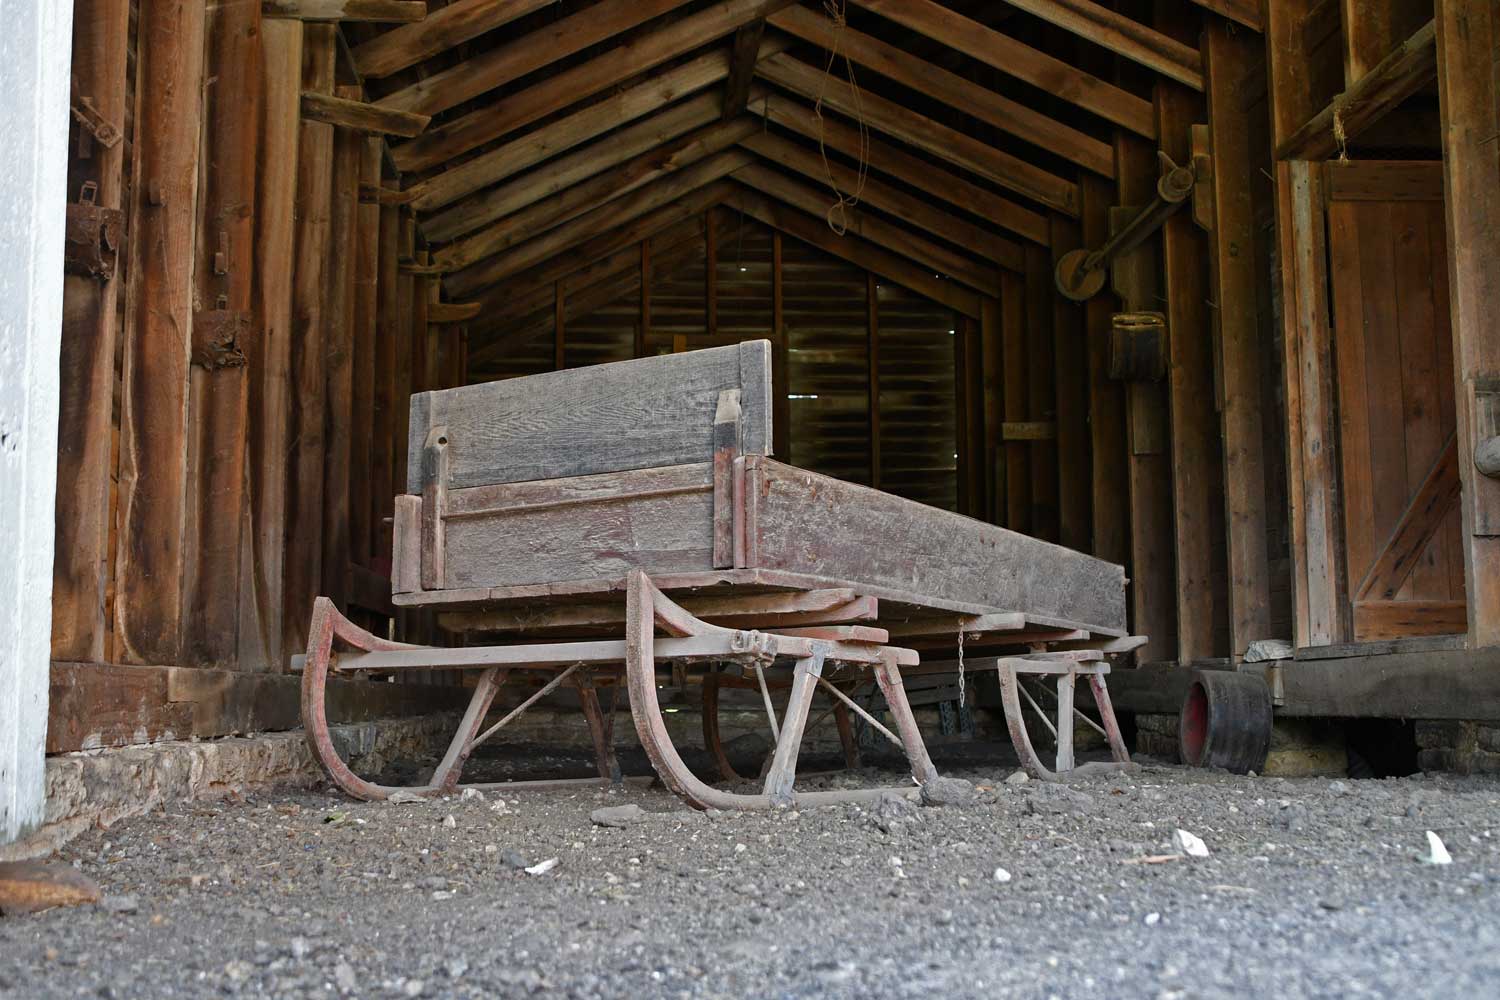 An old farm implement in a barn.